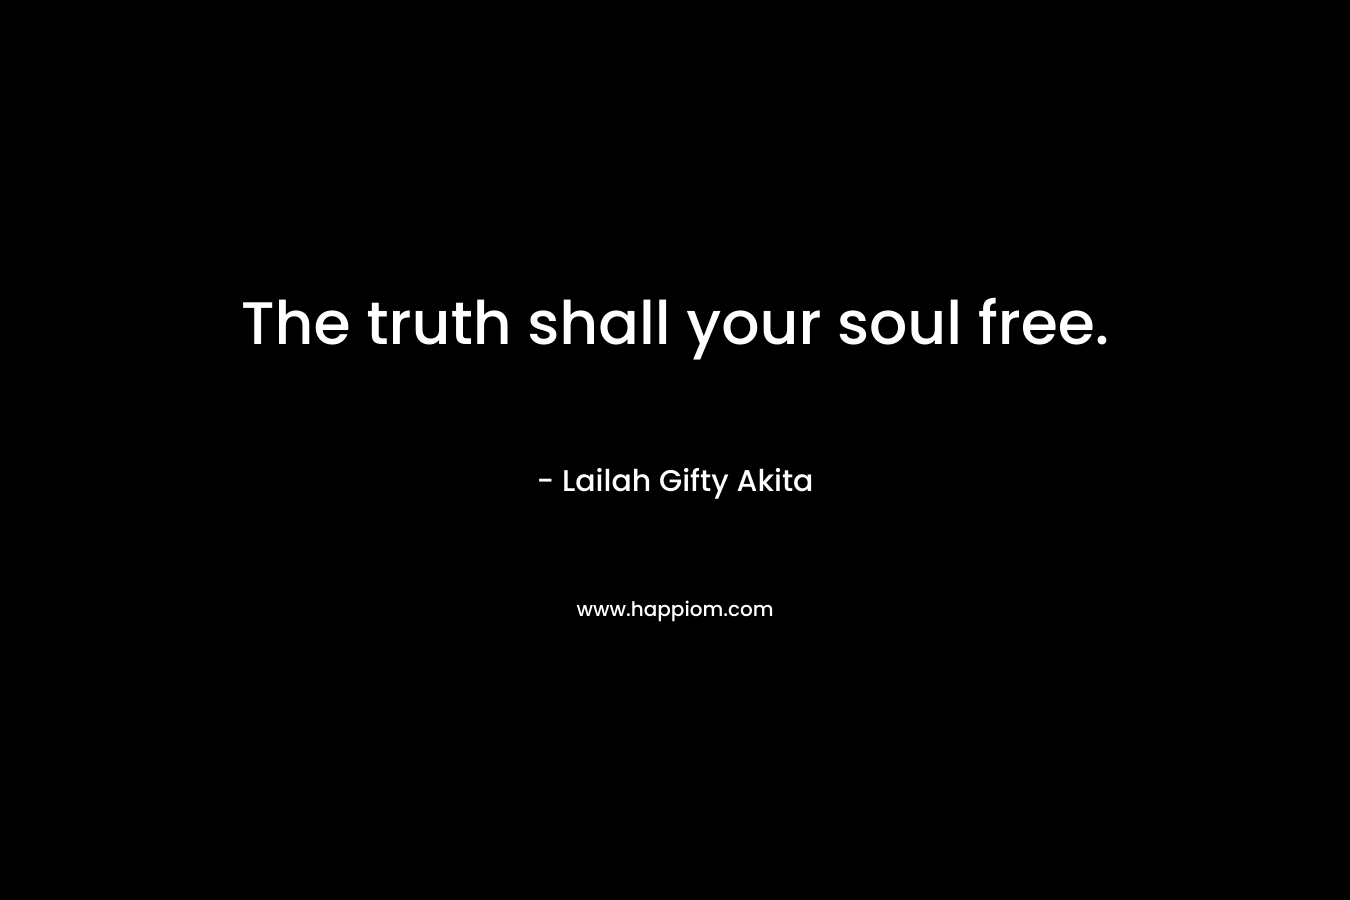 The truth shall your soul free.